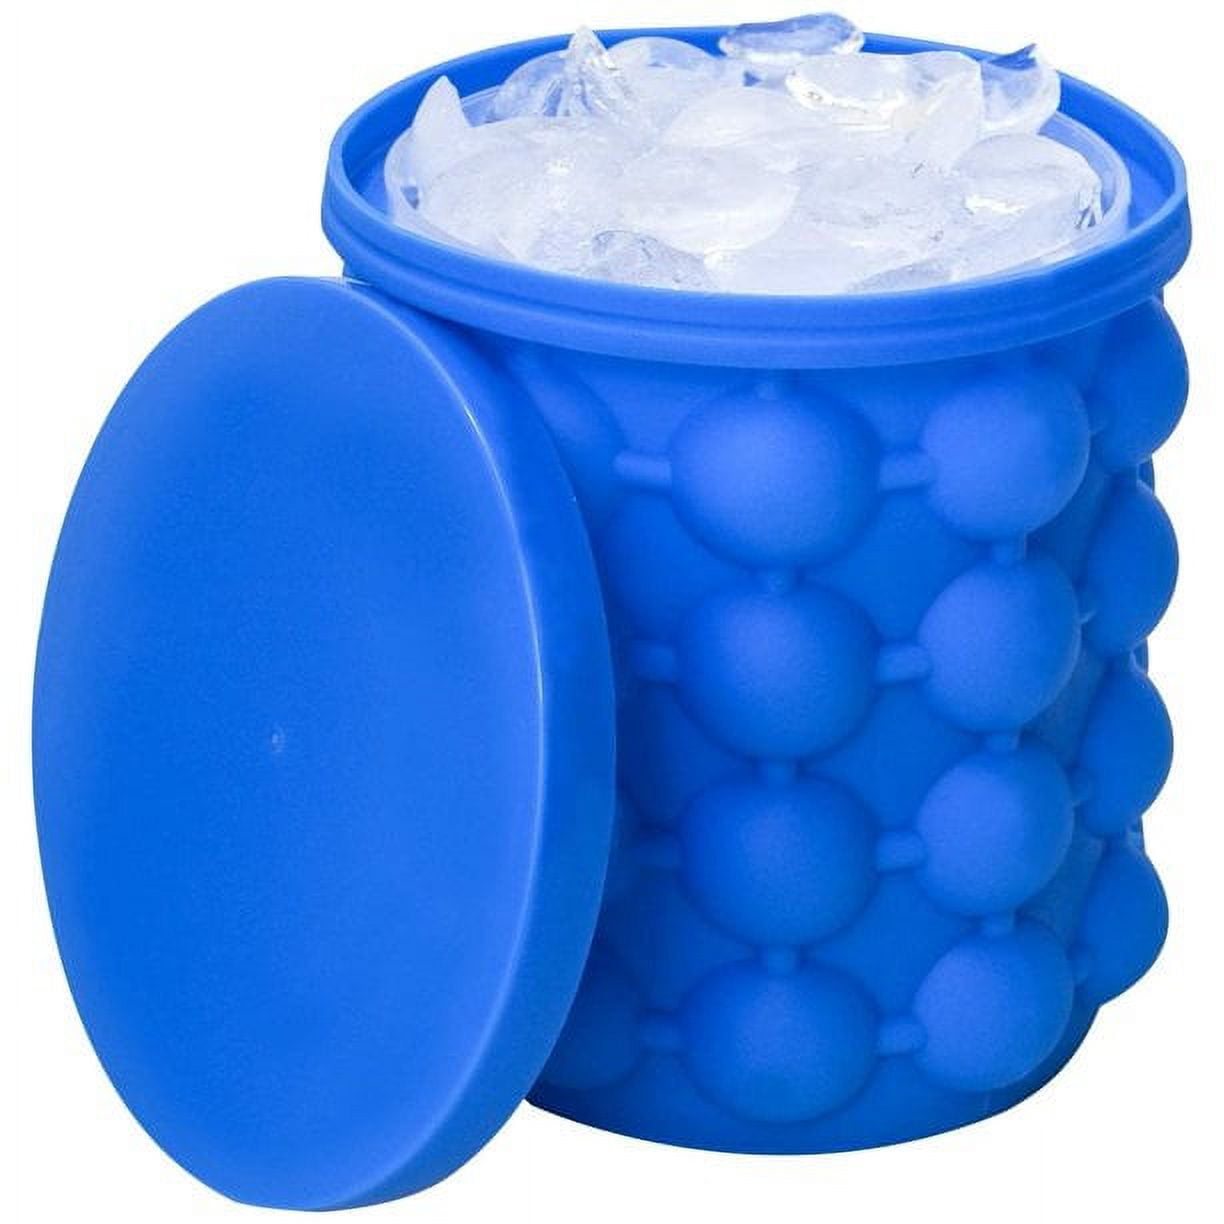 Large 2 in 1 Silicone Ice Bucket Ice Cube Maker Genie Mold With Lid Space  Saving Crushed Ice Tray Mold Wine Chilling Bucket Tool - AliExpress